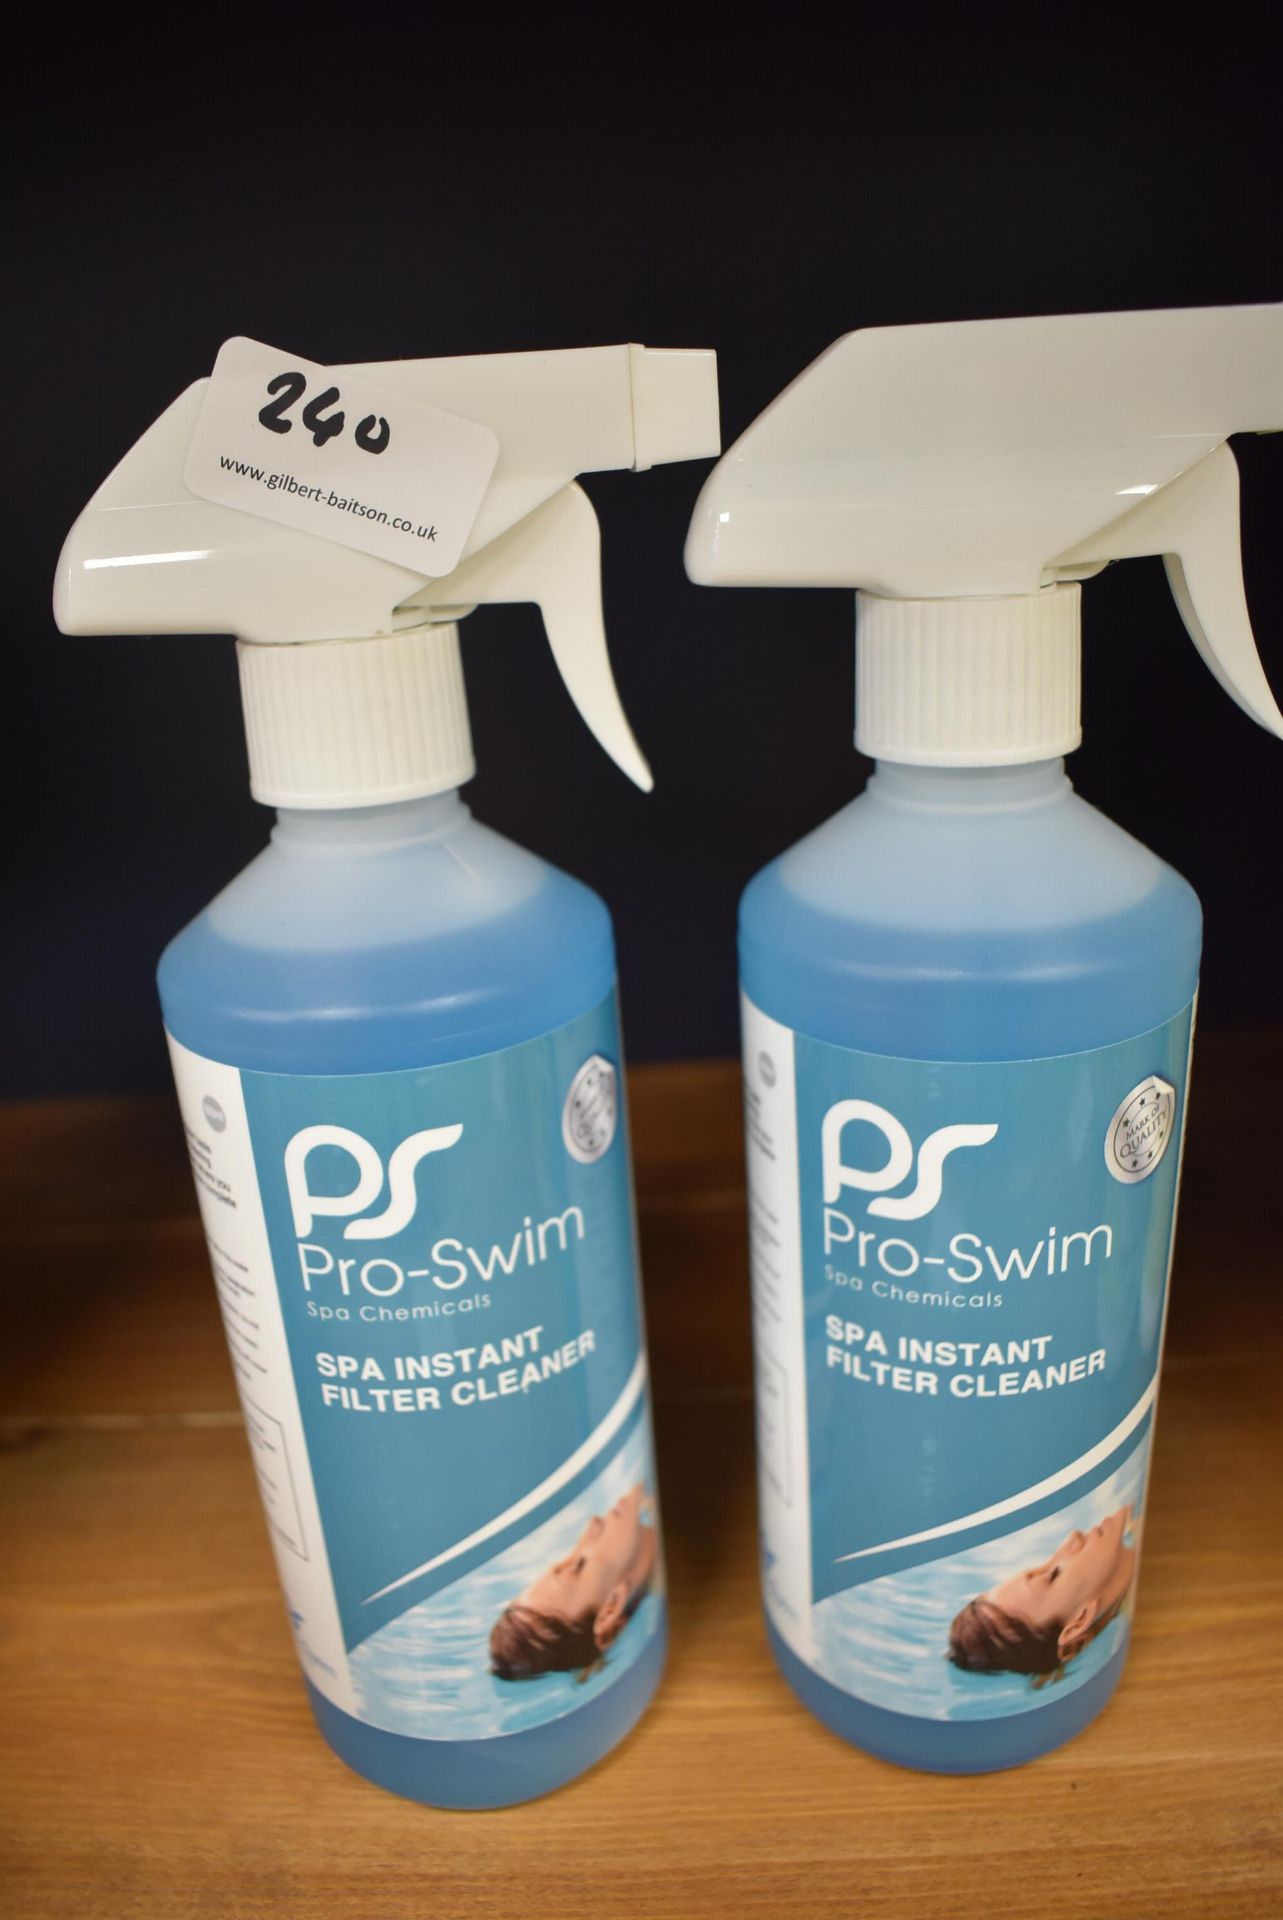 *Two Sprays of Pro Swim Spa Instant Filter Cleaner